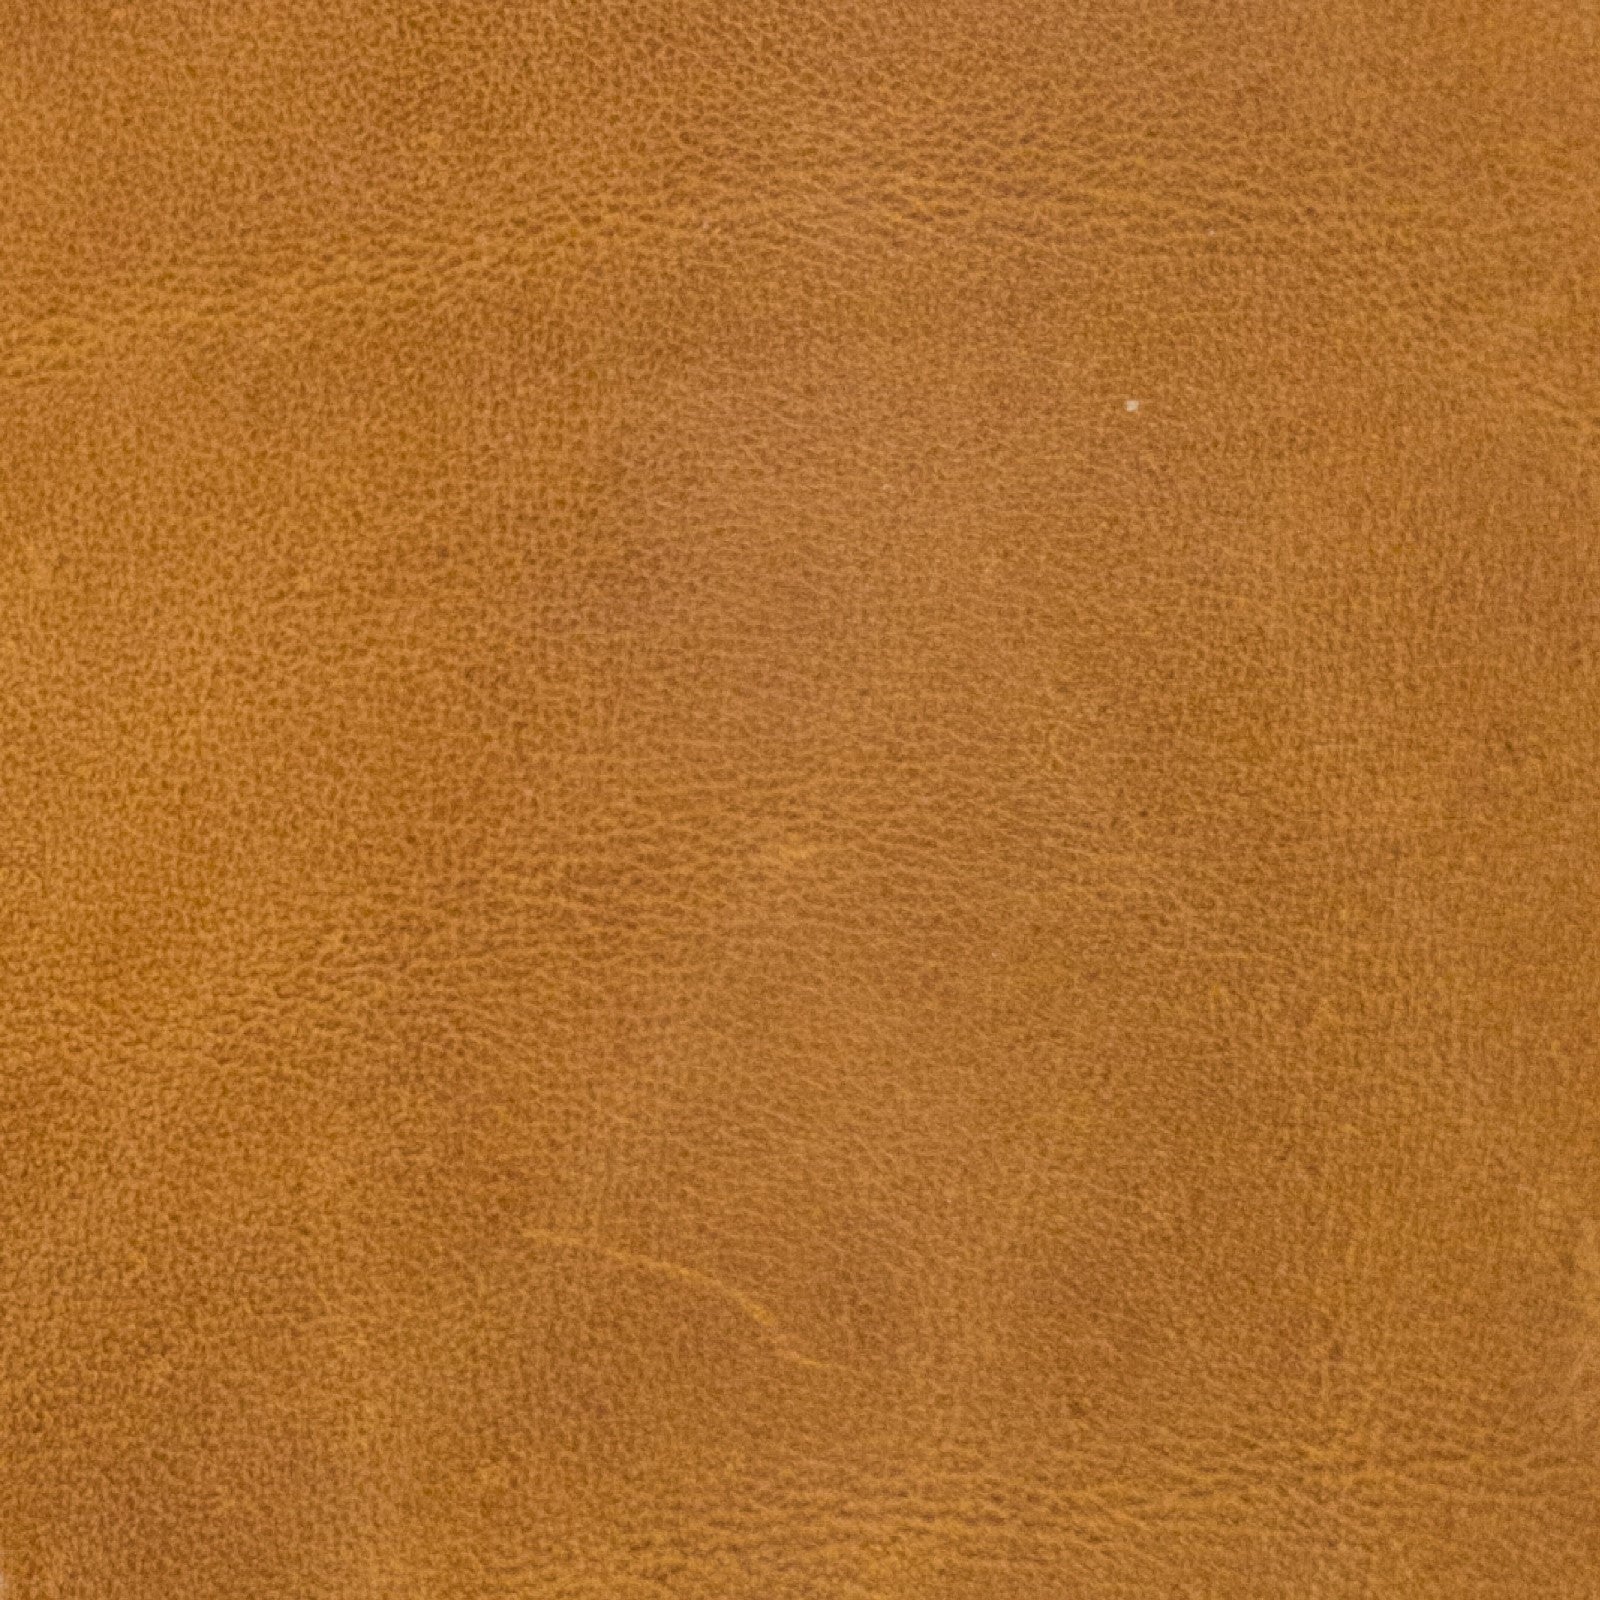 Shenandoah Collection 48-55 SF Full Hide Variation, Pronghorn Deep Tan | The Leather Guy